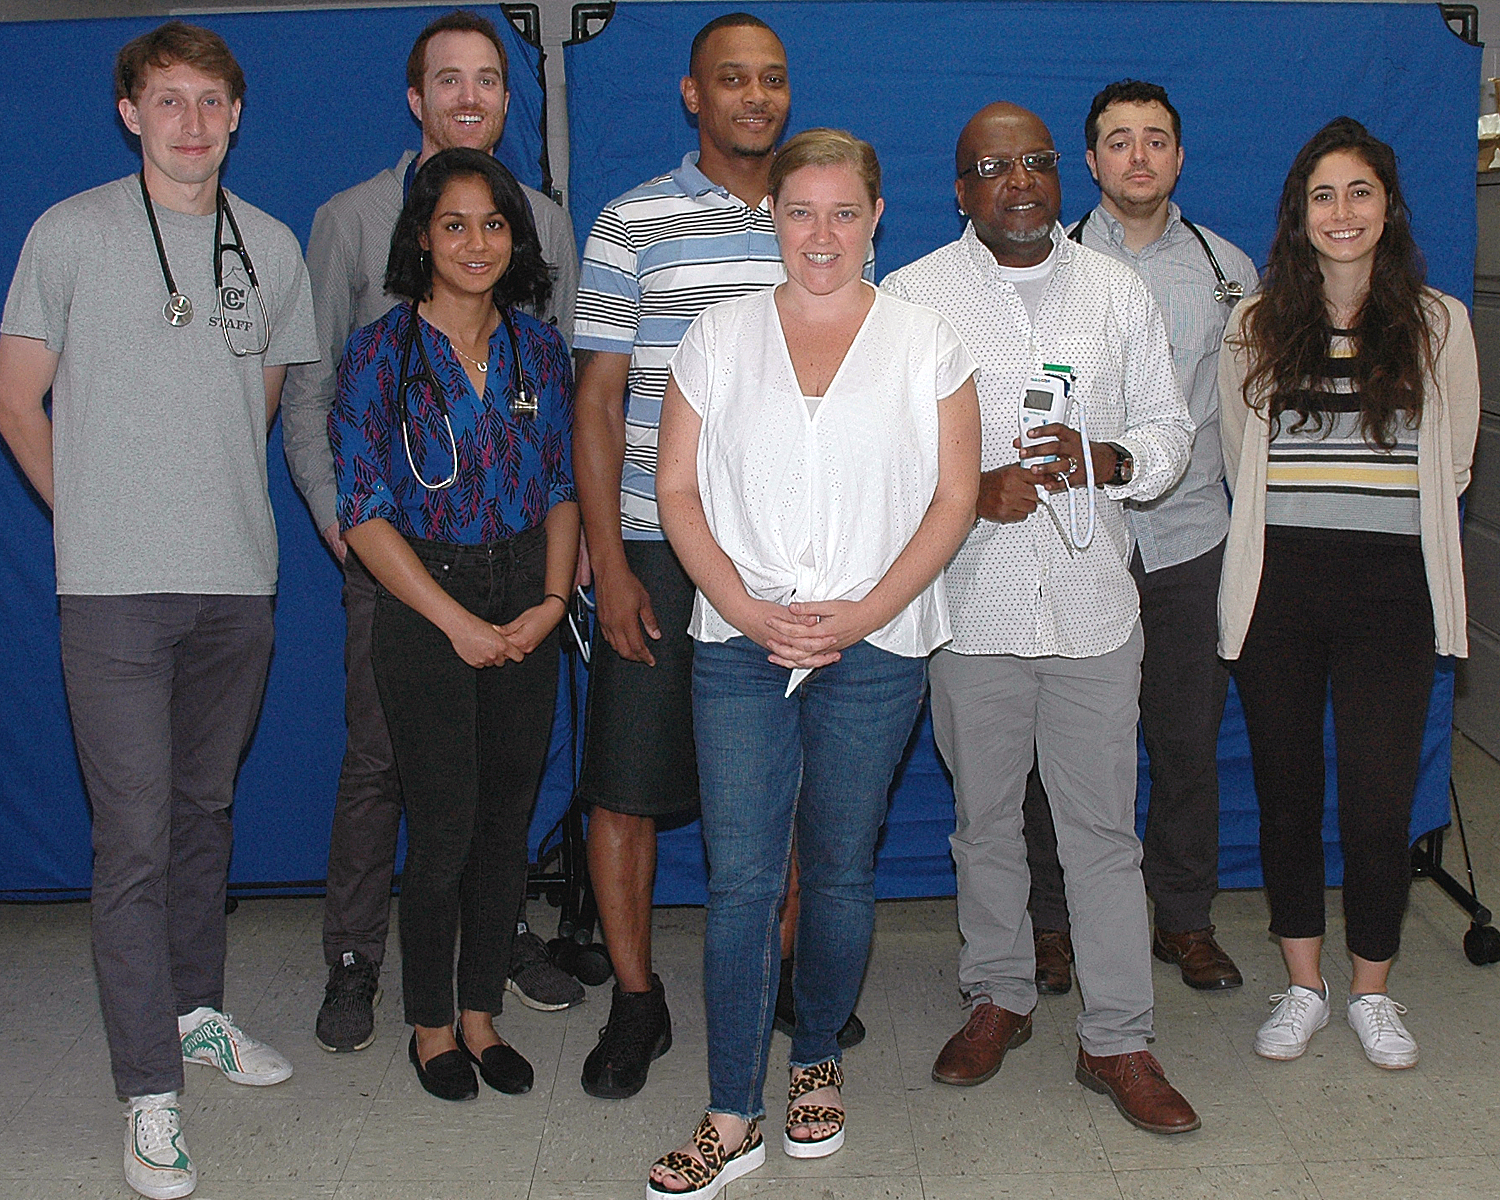 Cynthia Rossi, Guy Williams and Naheem Escort with the Columbia University Medical Students